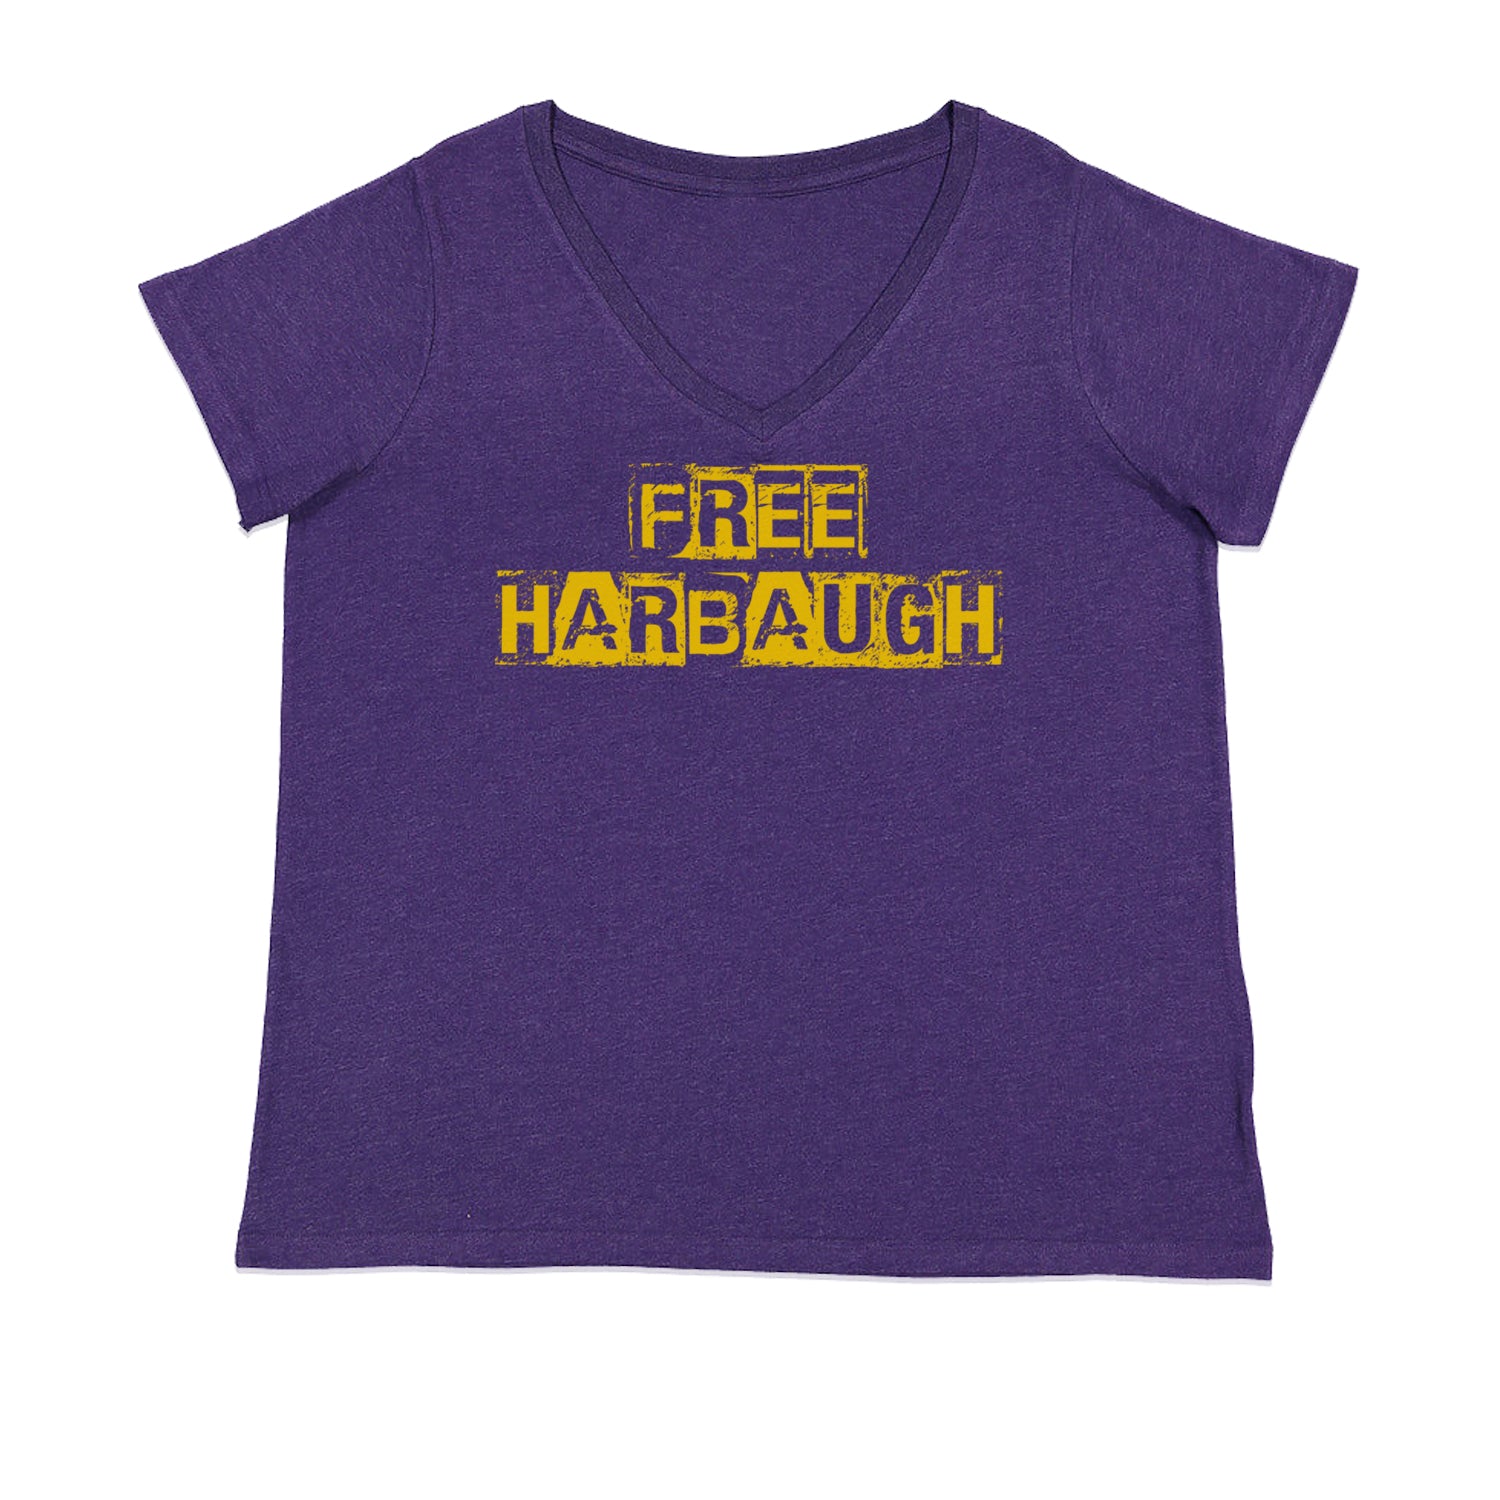 Free Harbaugh Release Our Coach Womens Plus Size V-Neck T-shirt